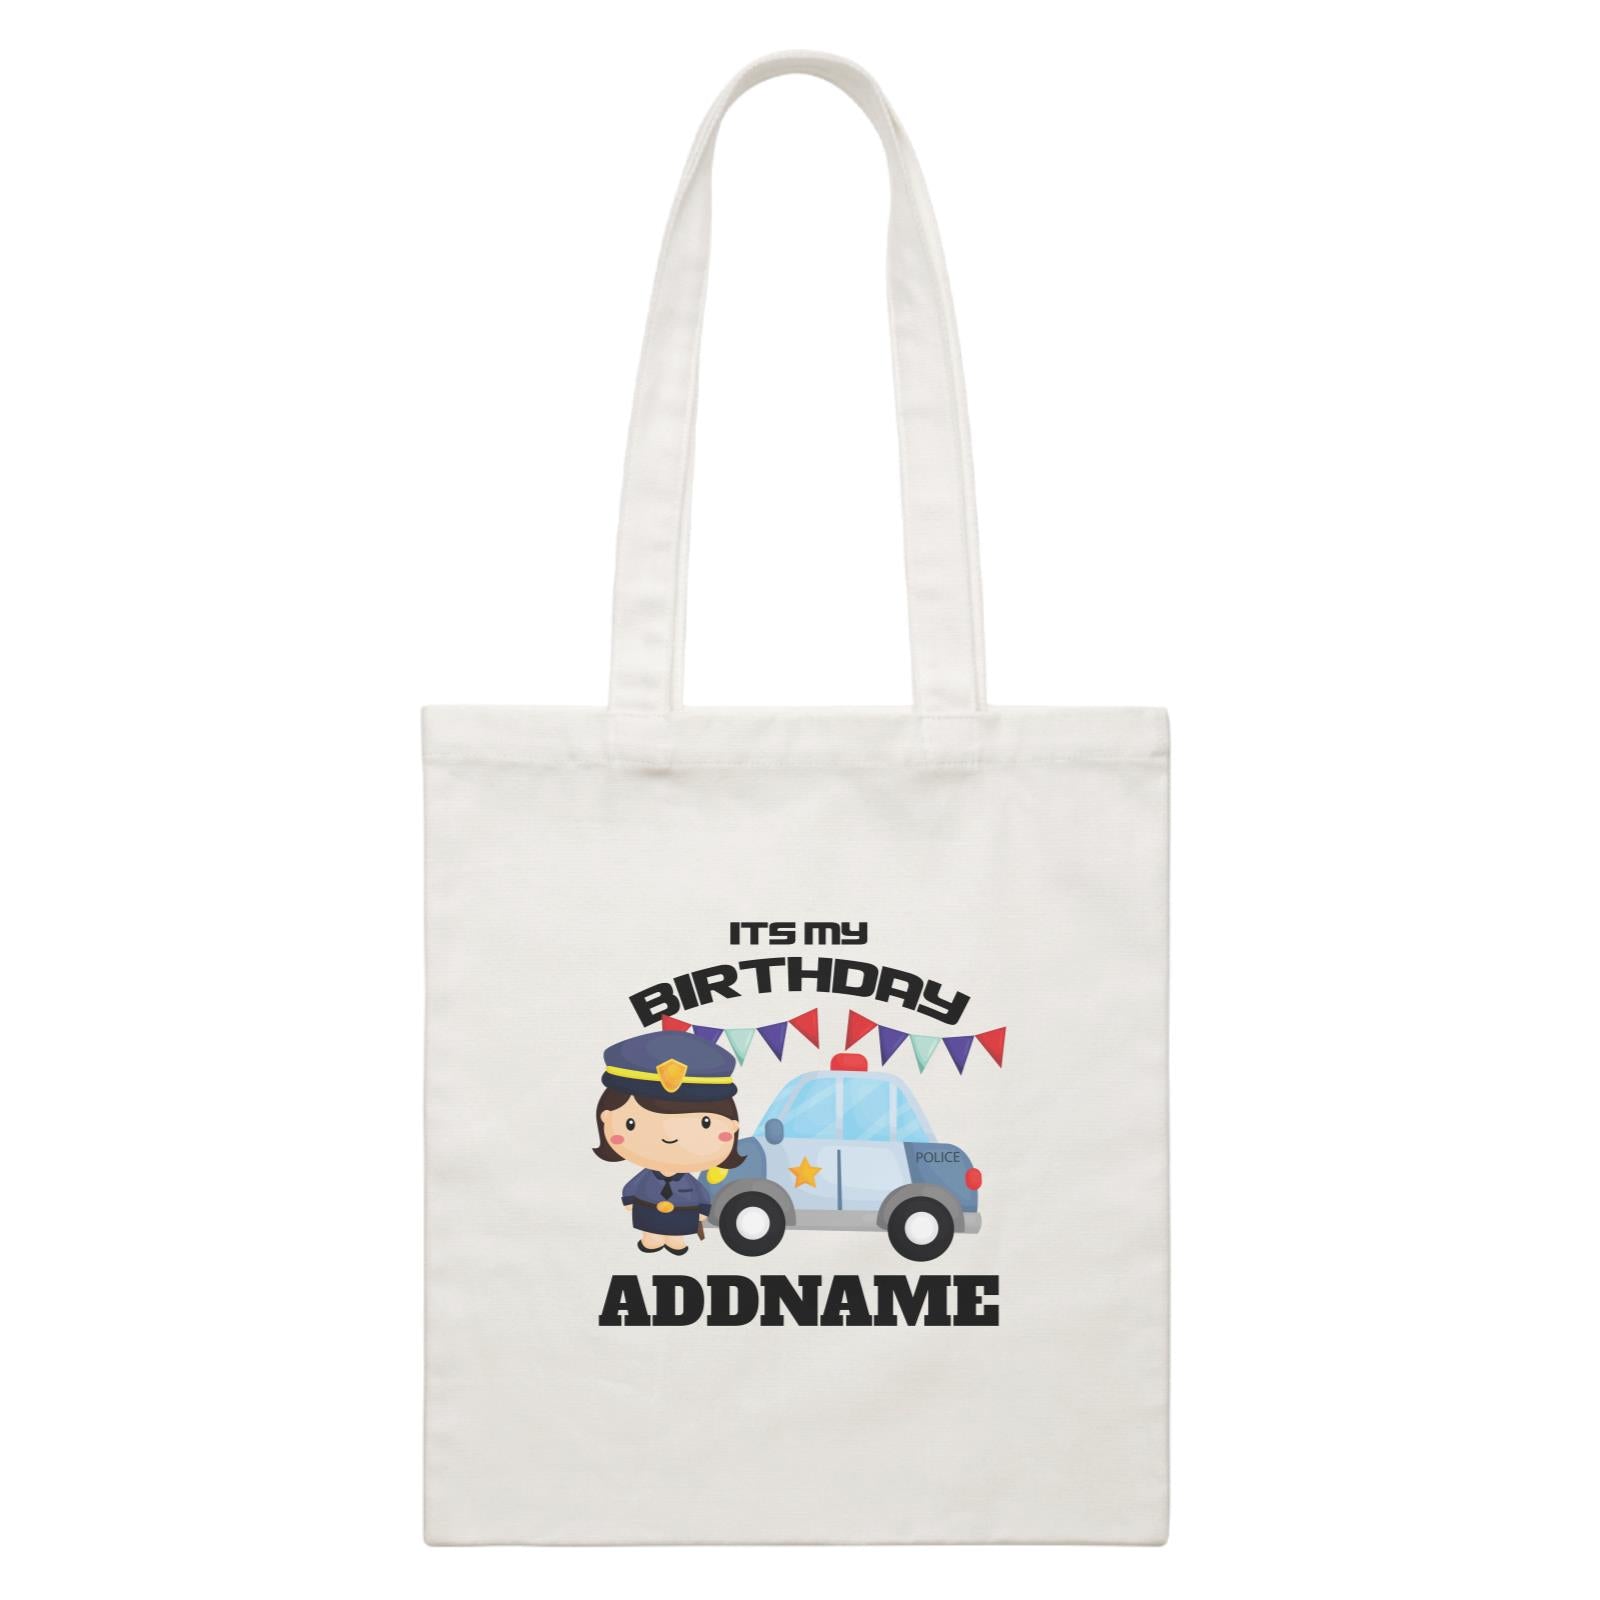 Birthday Police Officer Girl In Suit With Police Car Its My Birthday Addname White Canvas Bag